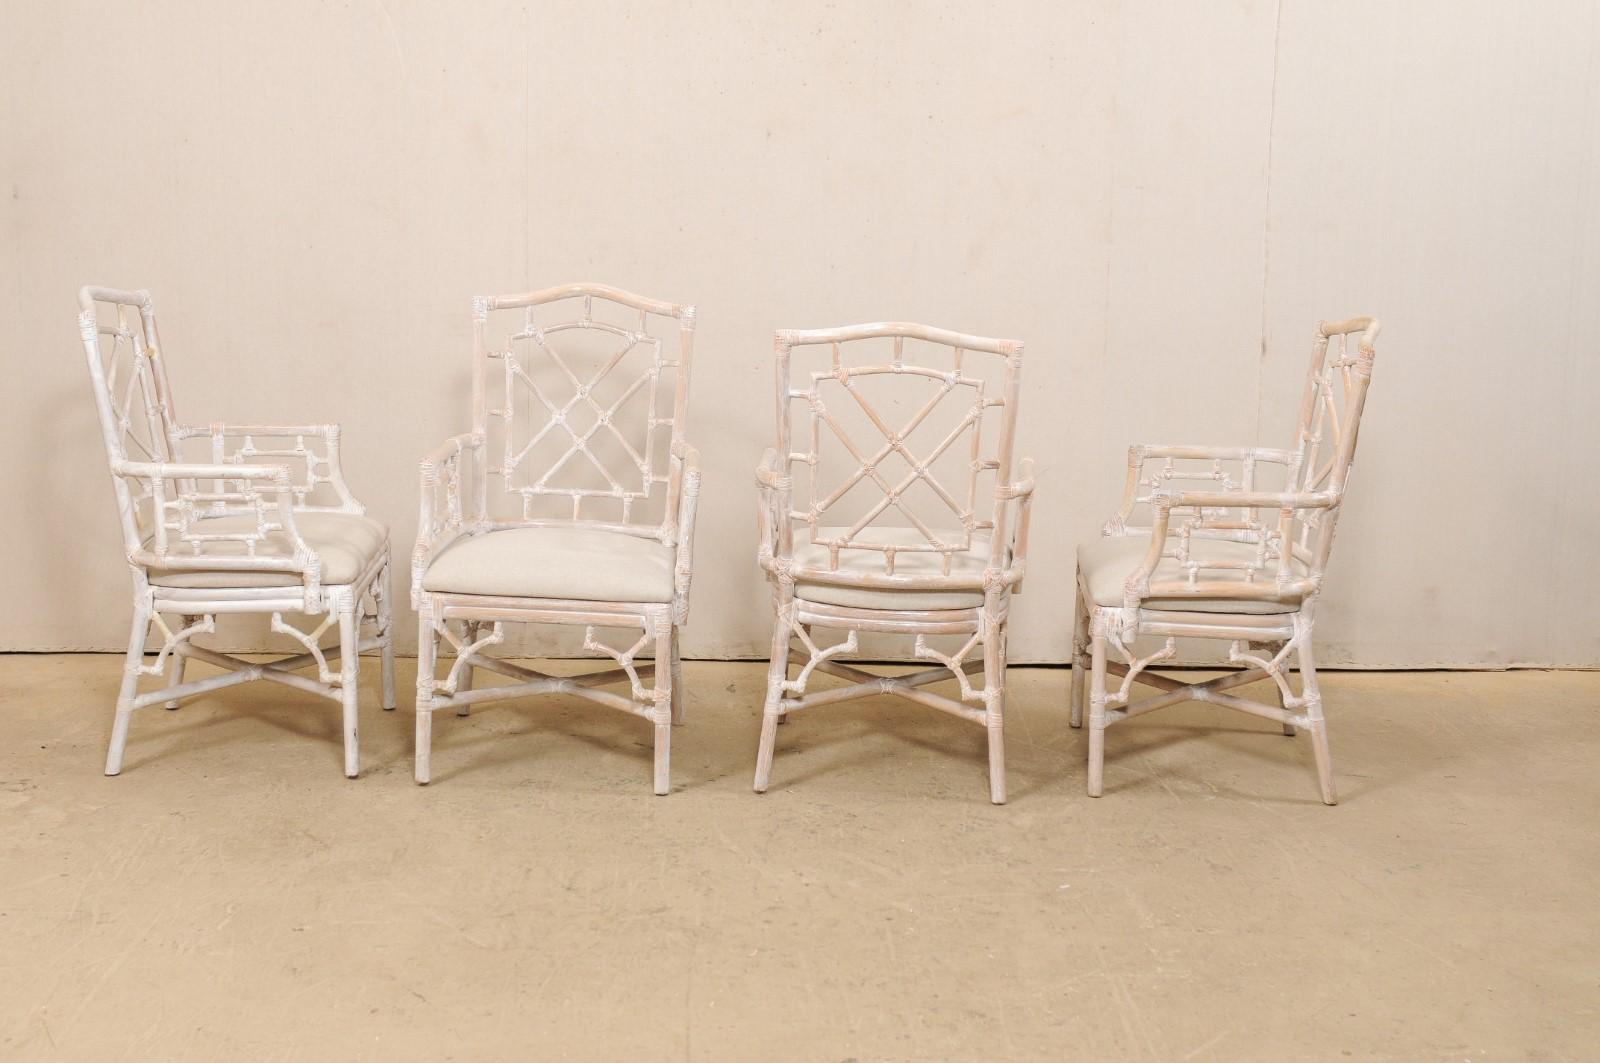 A set of four American-made faux-bamboo wooden armchairs with upholstered seats. This vintage set of Hollywood Regency inspired occasional chairs have wood frames, which have been carved to mimic the design of bamboo. The faux bamboo is crossed